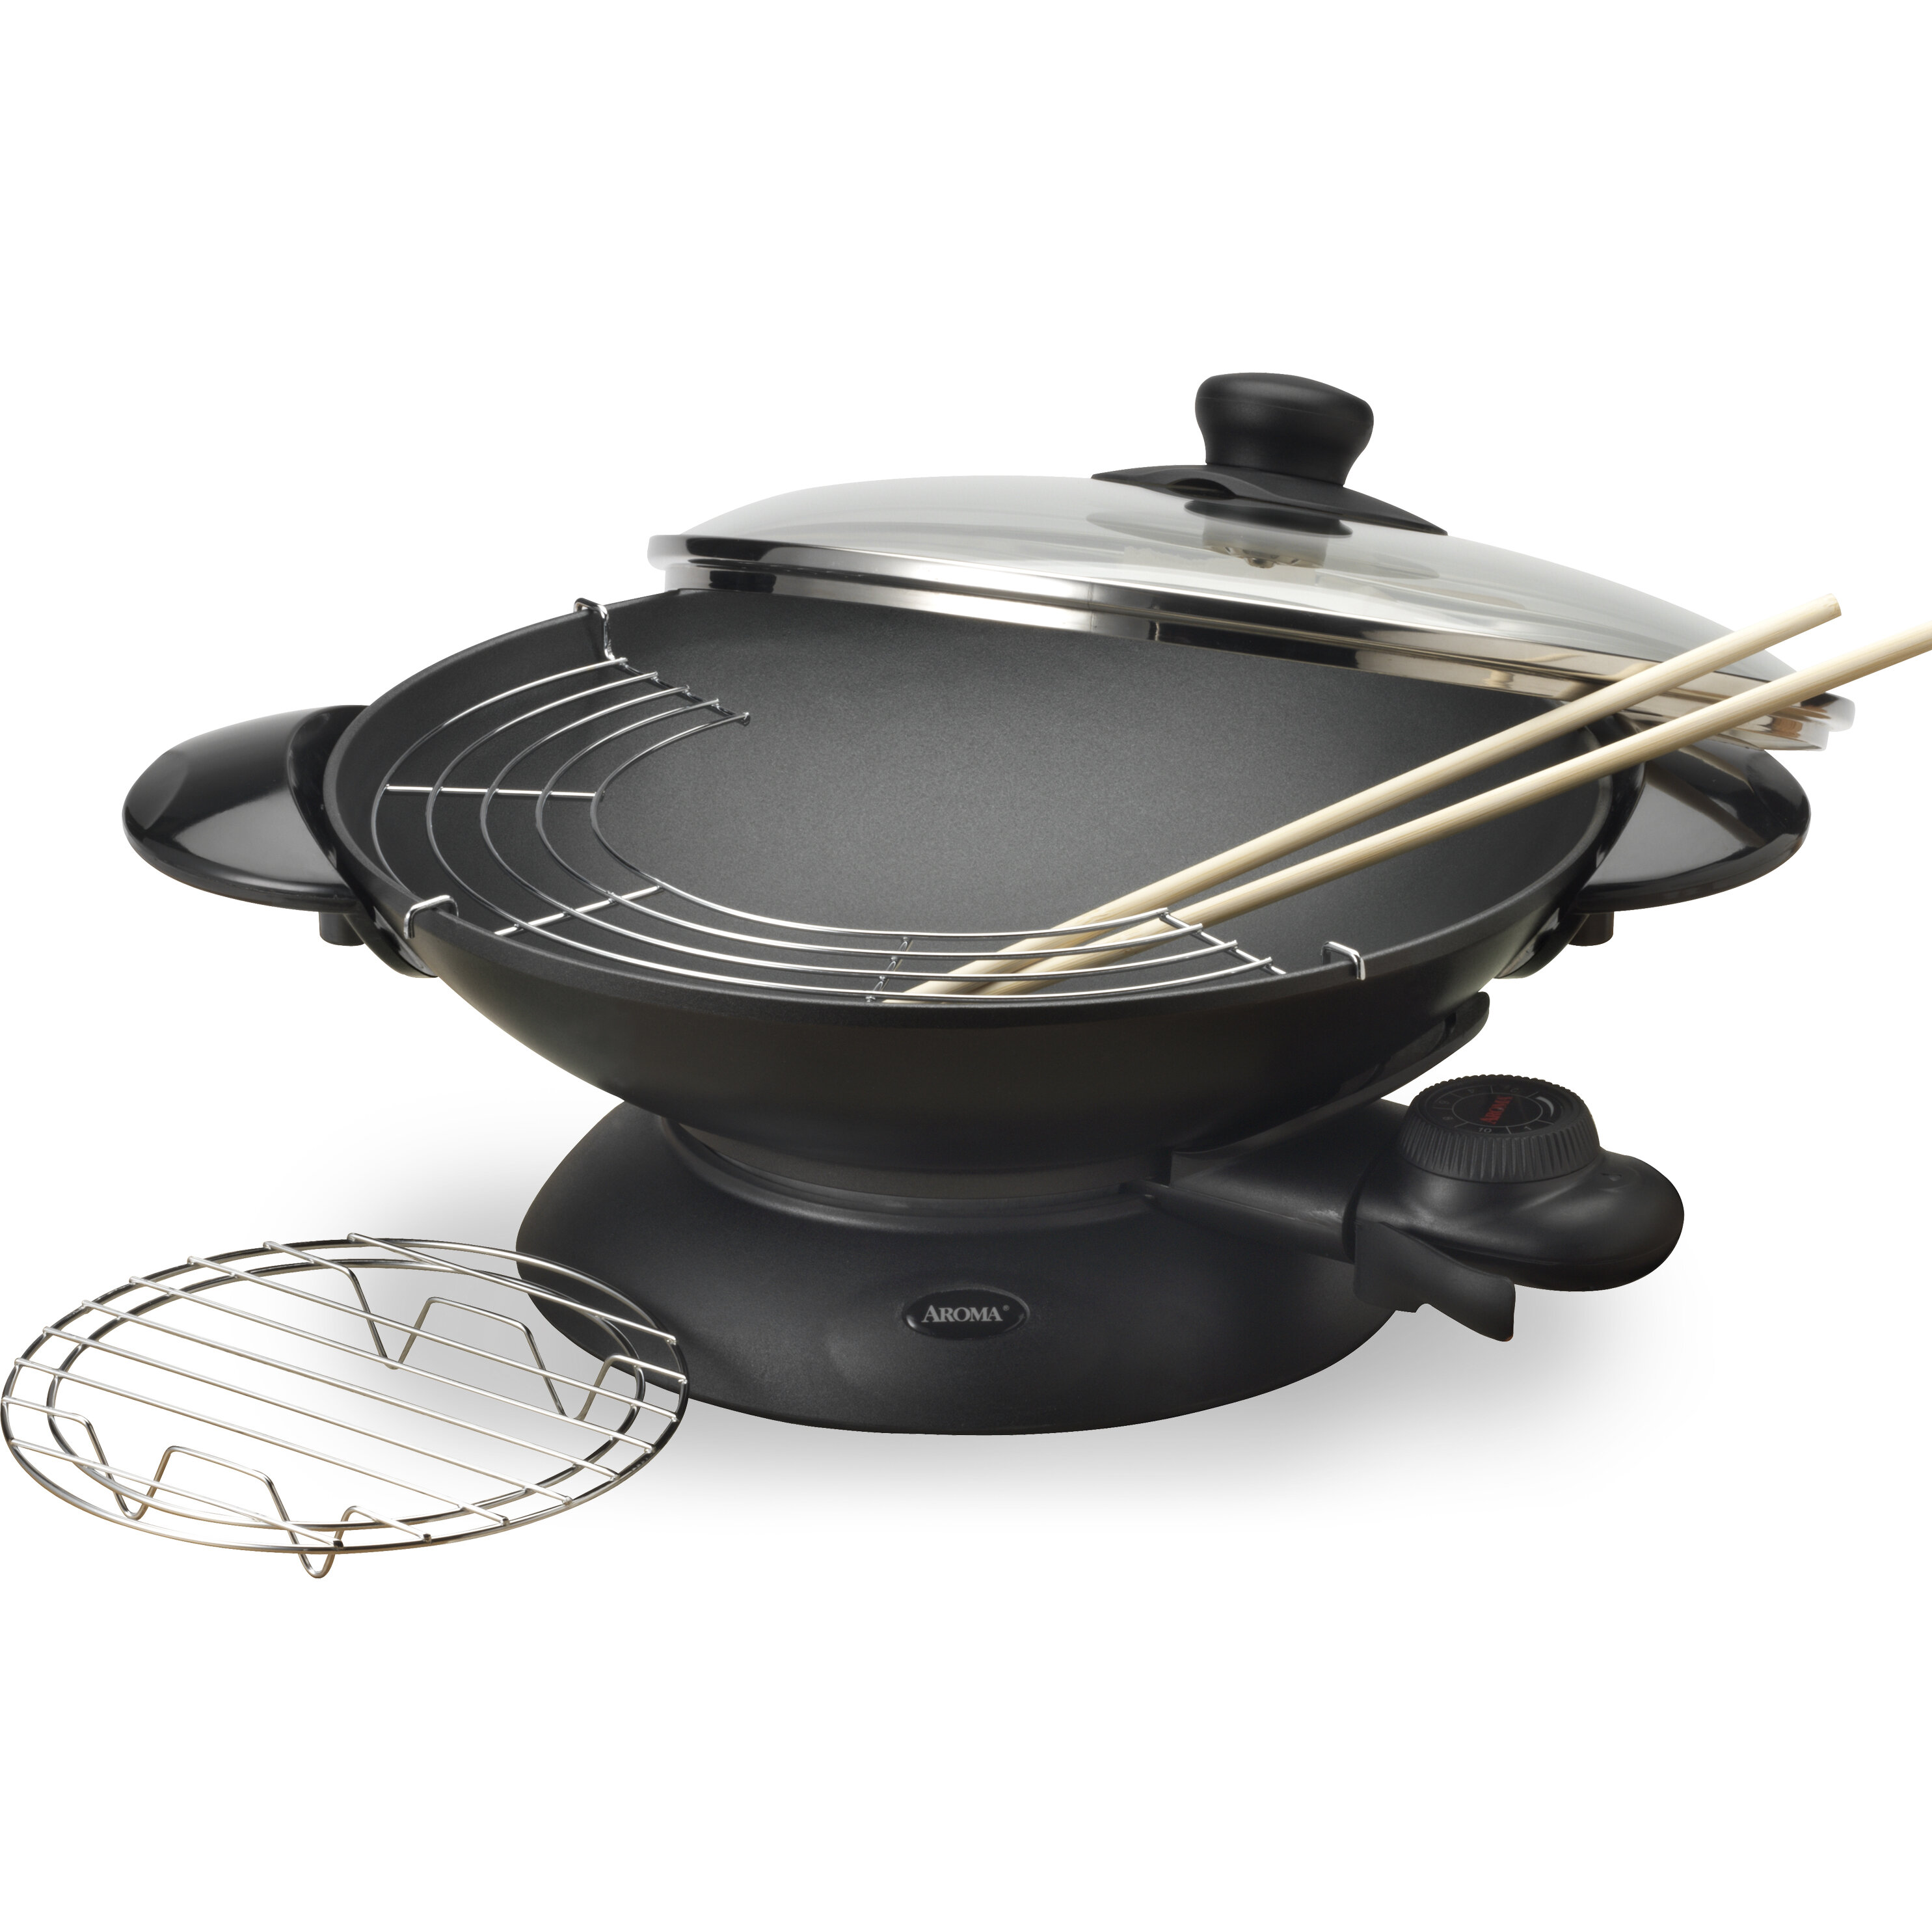 Aroma 13.5 Cast Iron Electric Wok with Glass Lid & Reviews